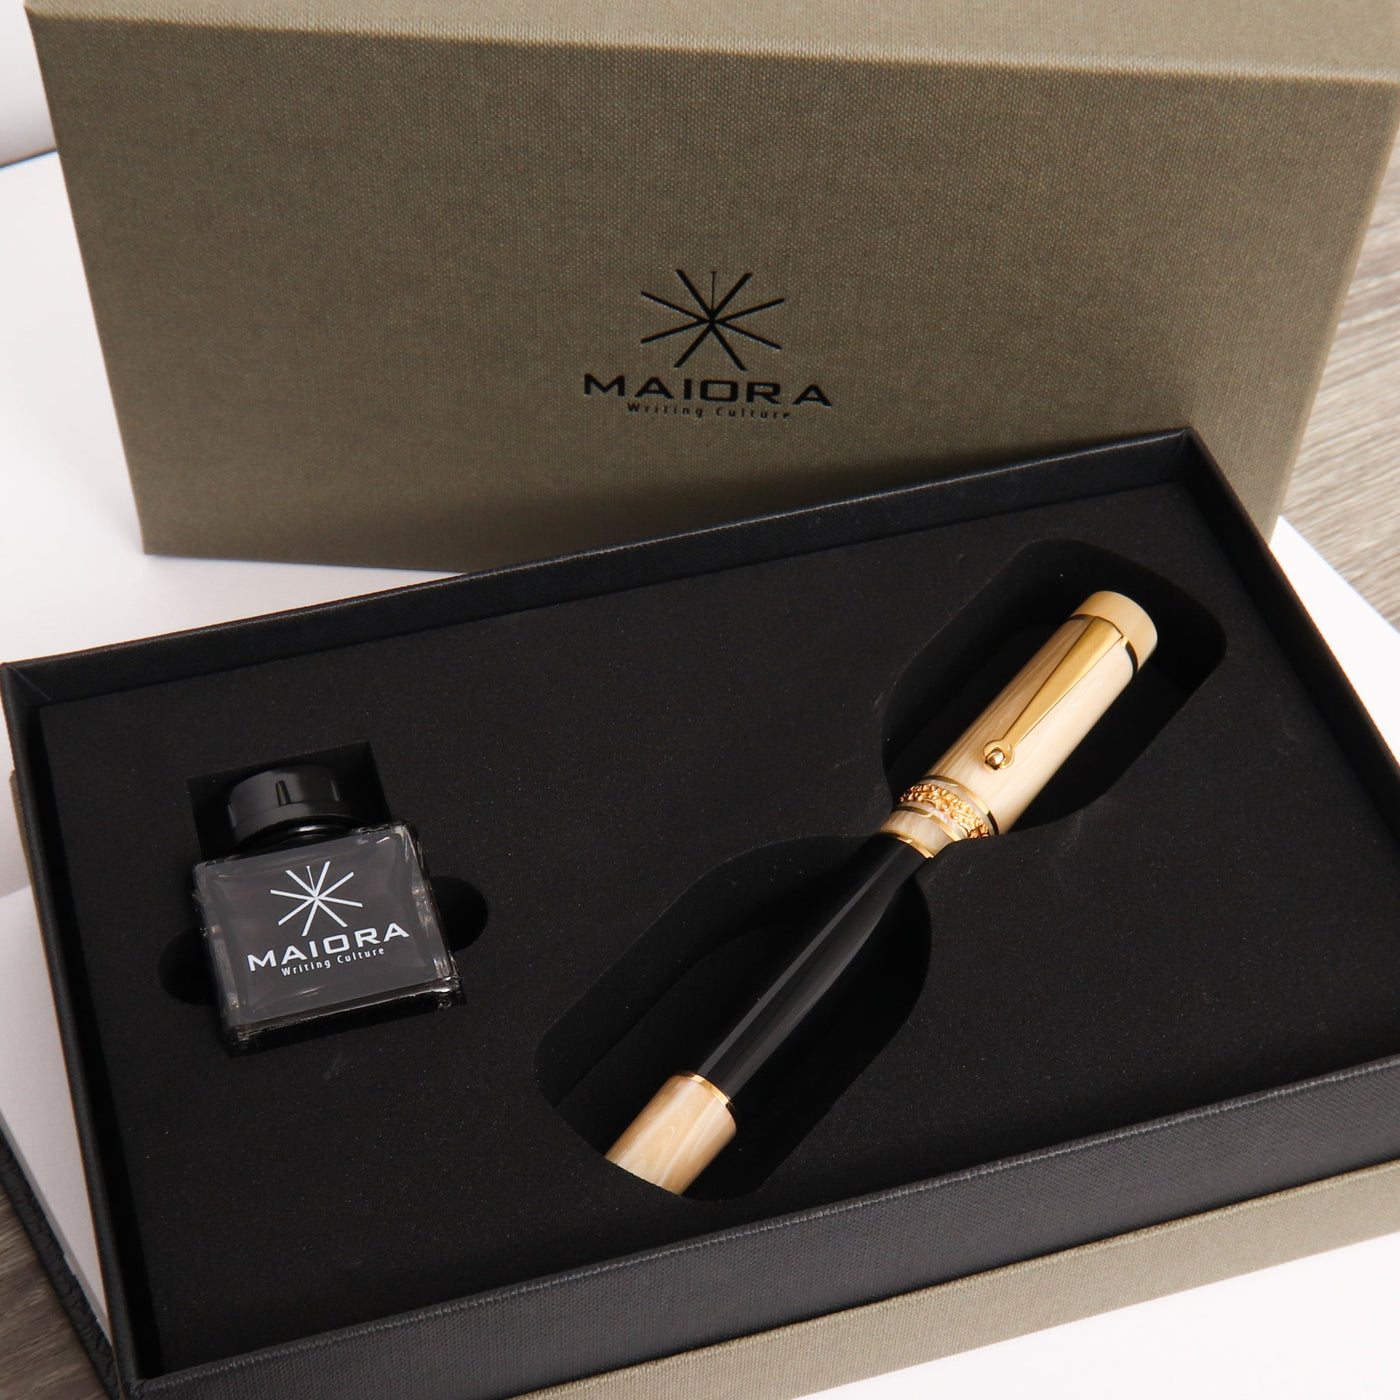 Maiora Notte Luna Numbered Edition Fountain Pen Inside Packaging